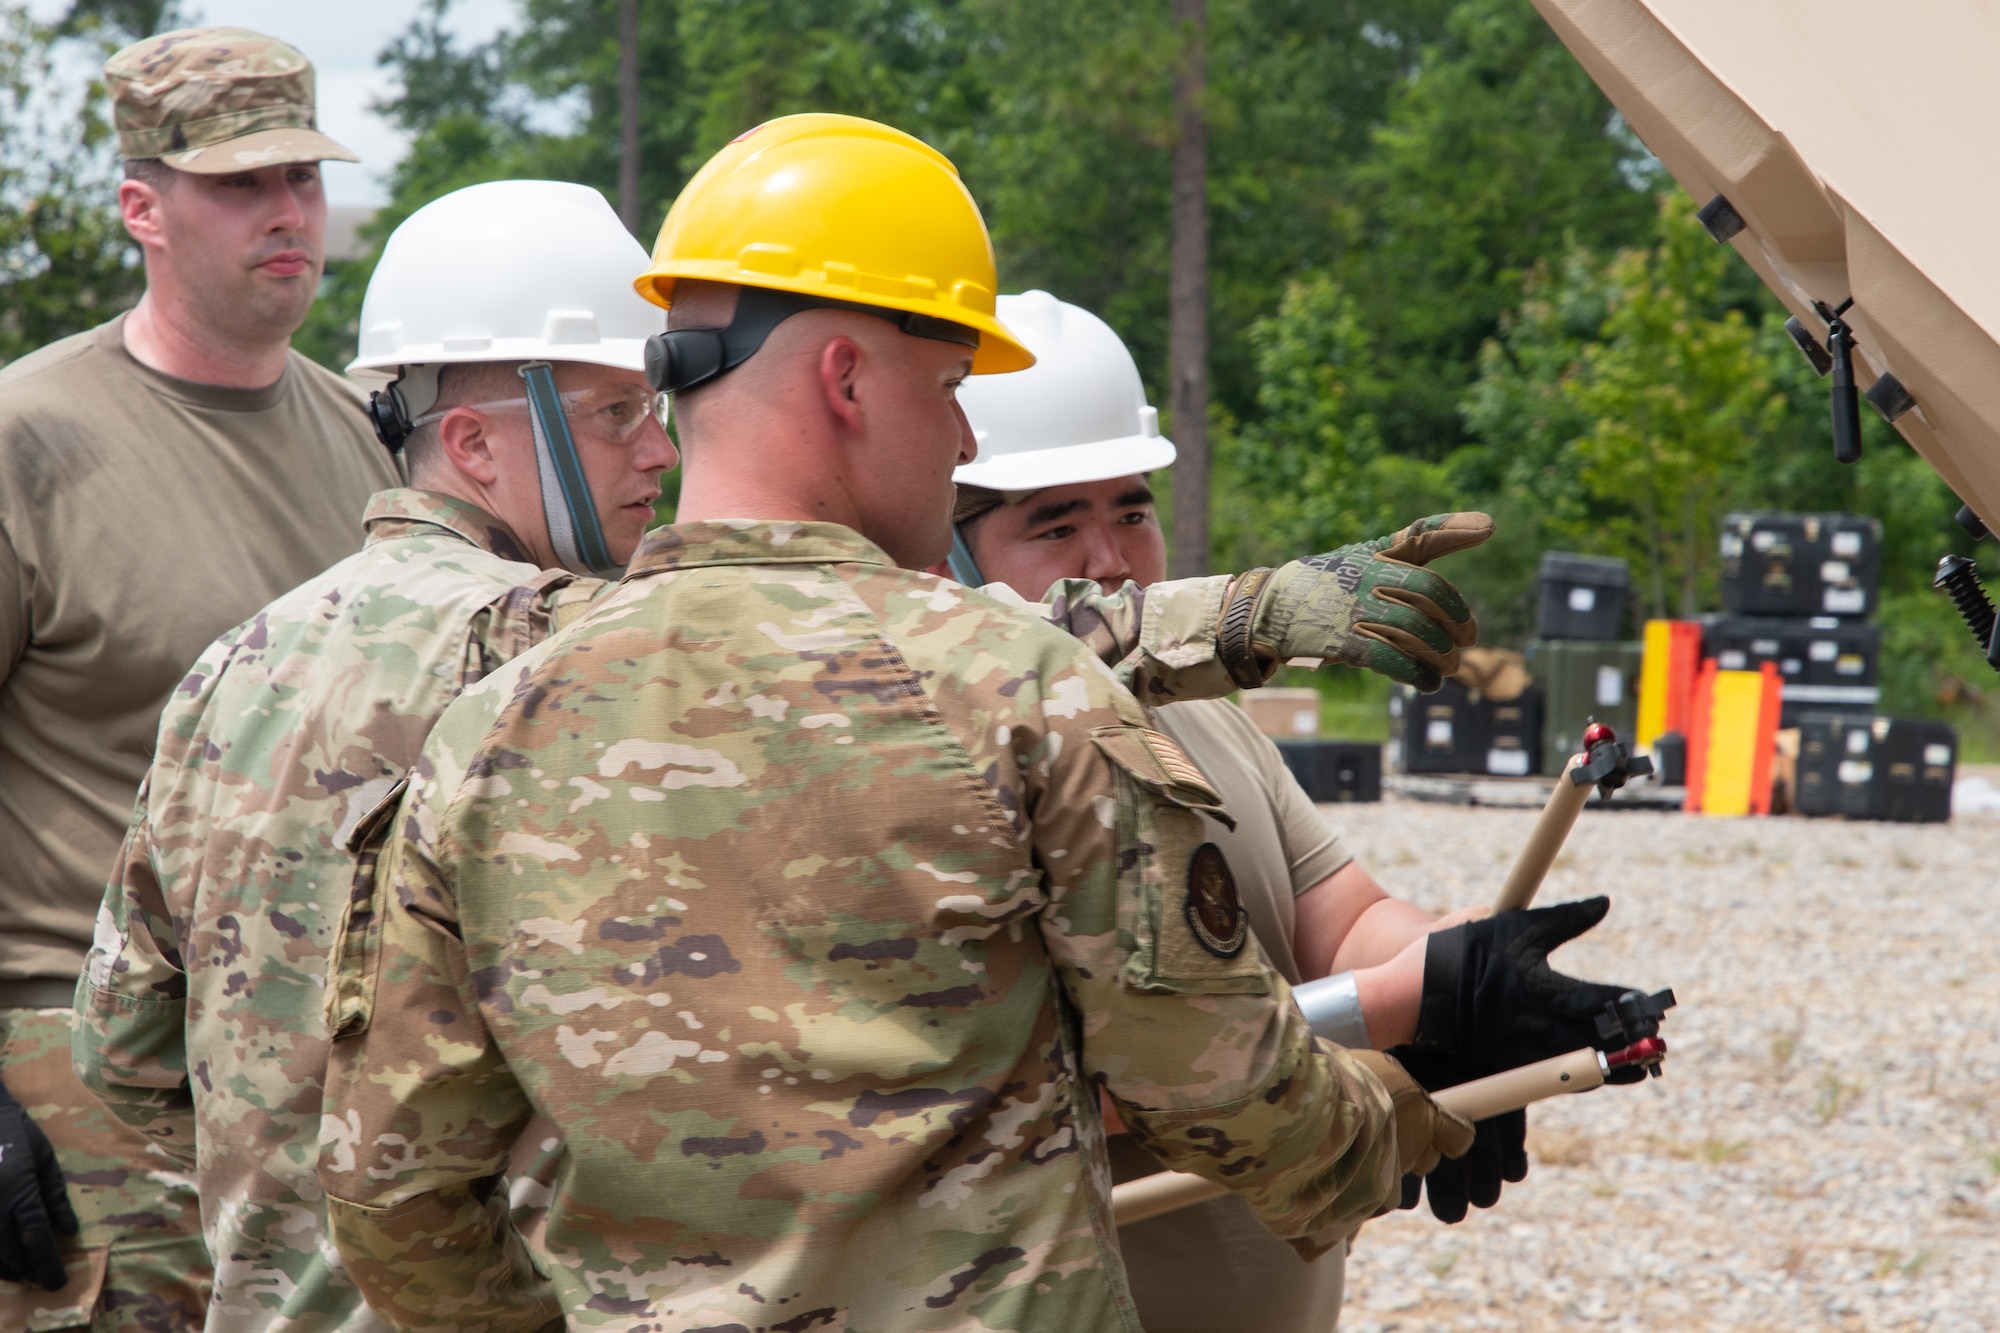 Members of the 239th Combat Communications Squadron ready a satellite communications antenna for use during Exercise BUMBU 22 at Camp Shelby, Miss., June 3, 2022. BUMBU 22 brings five combat communications squadrons with the 254th Combat Communications Group from their home stations located across the nation together for a consolidated training exercise. (U.S. Air National Guard photo by Staff Sgt. Adrian Brakeley)